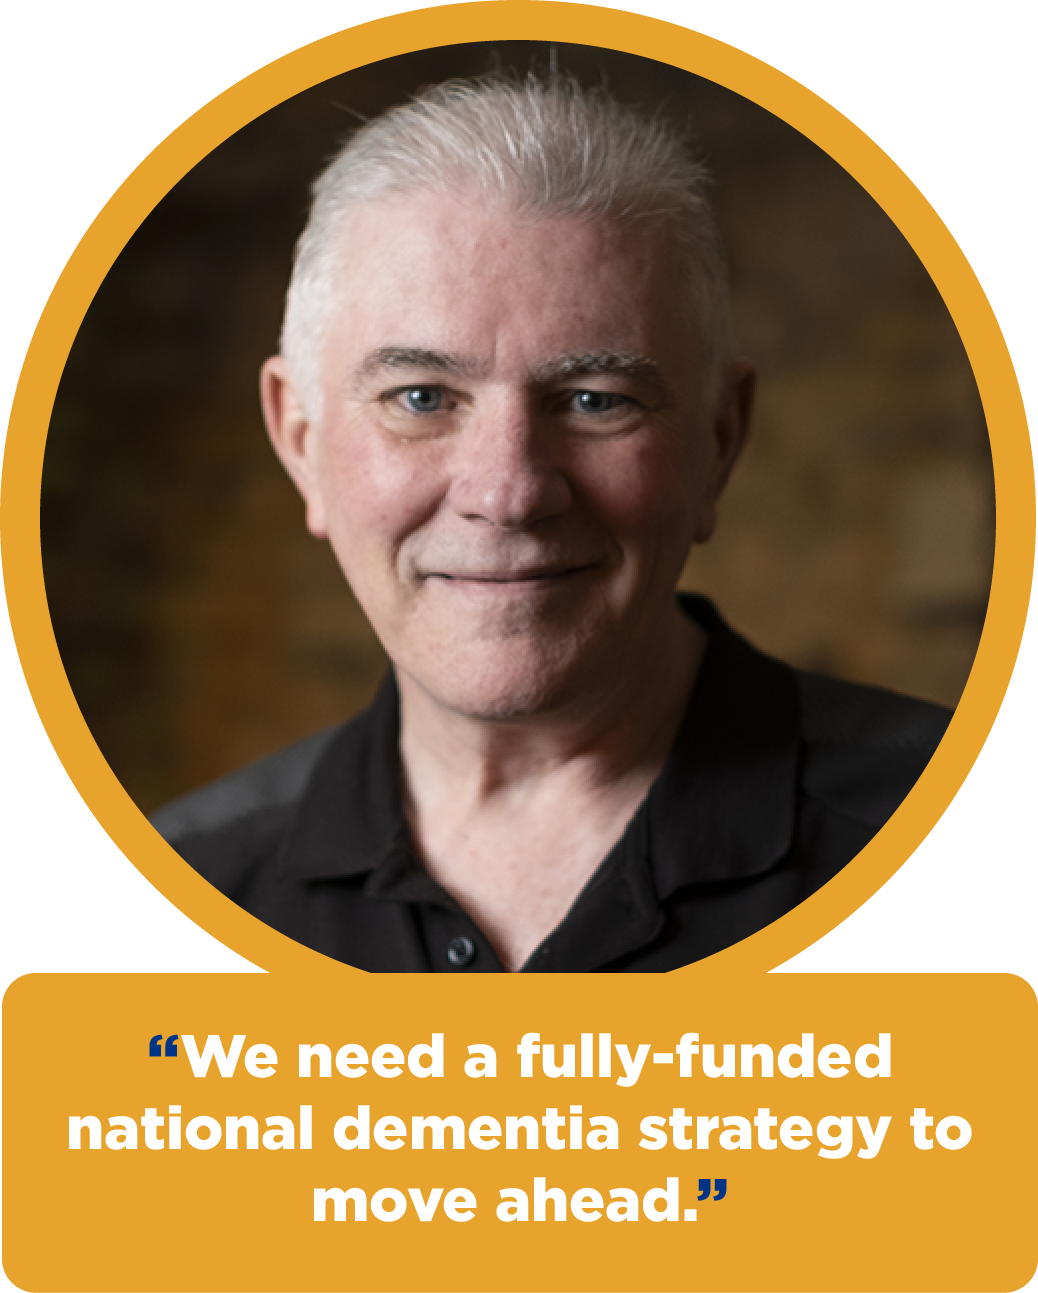 Roger Marple: "We need a fully-funded national dementia strategy to move ahead."